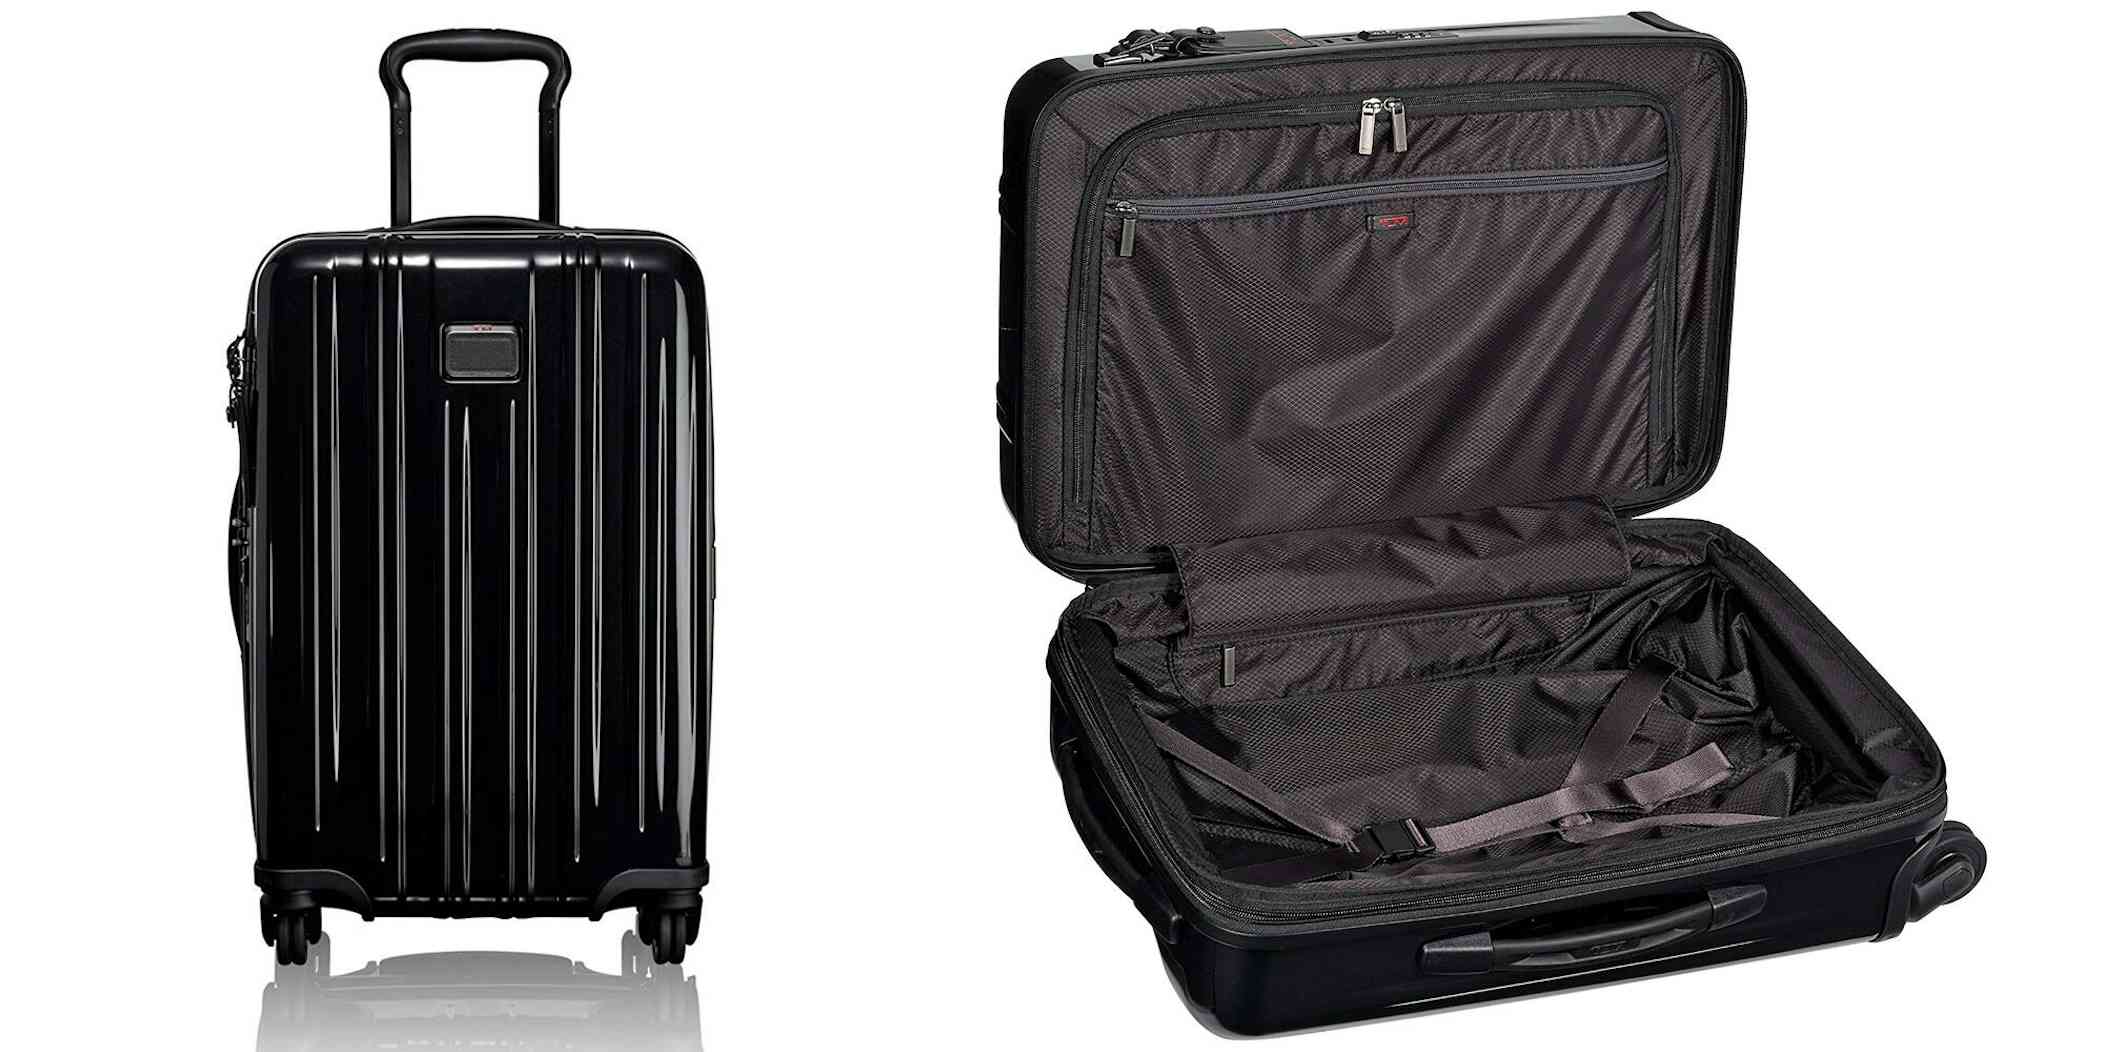 Is the Keepall 45 a carry-on? - Questions & Answers